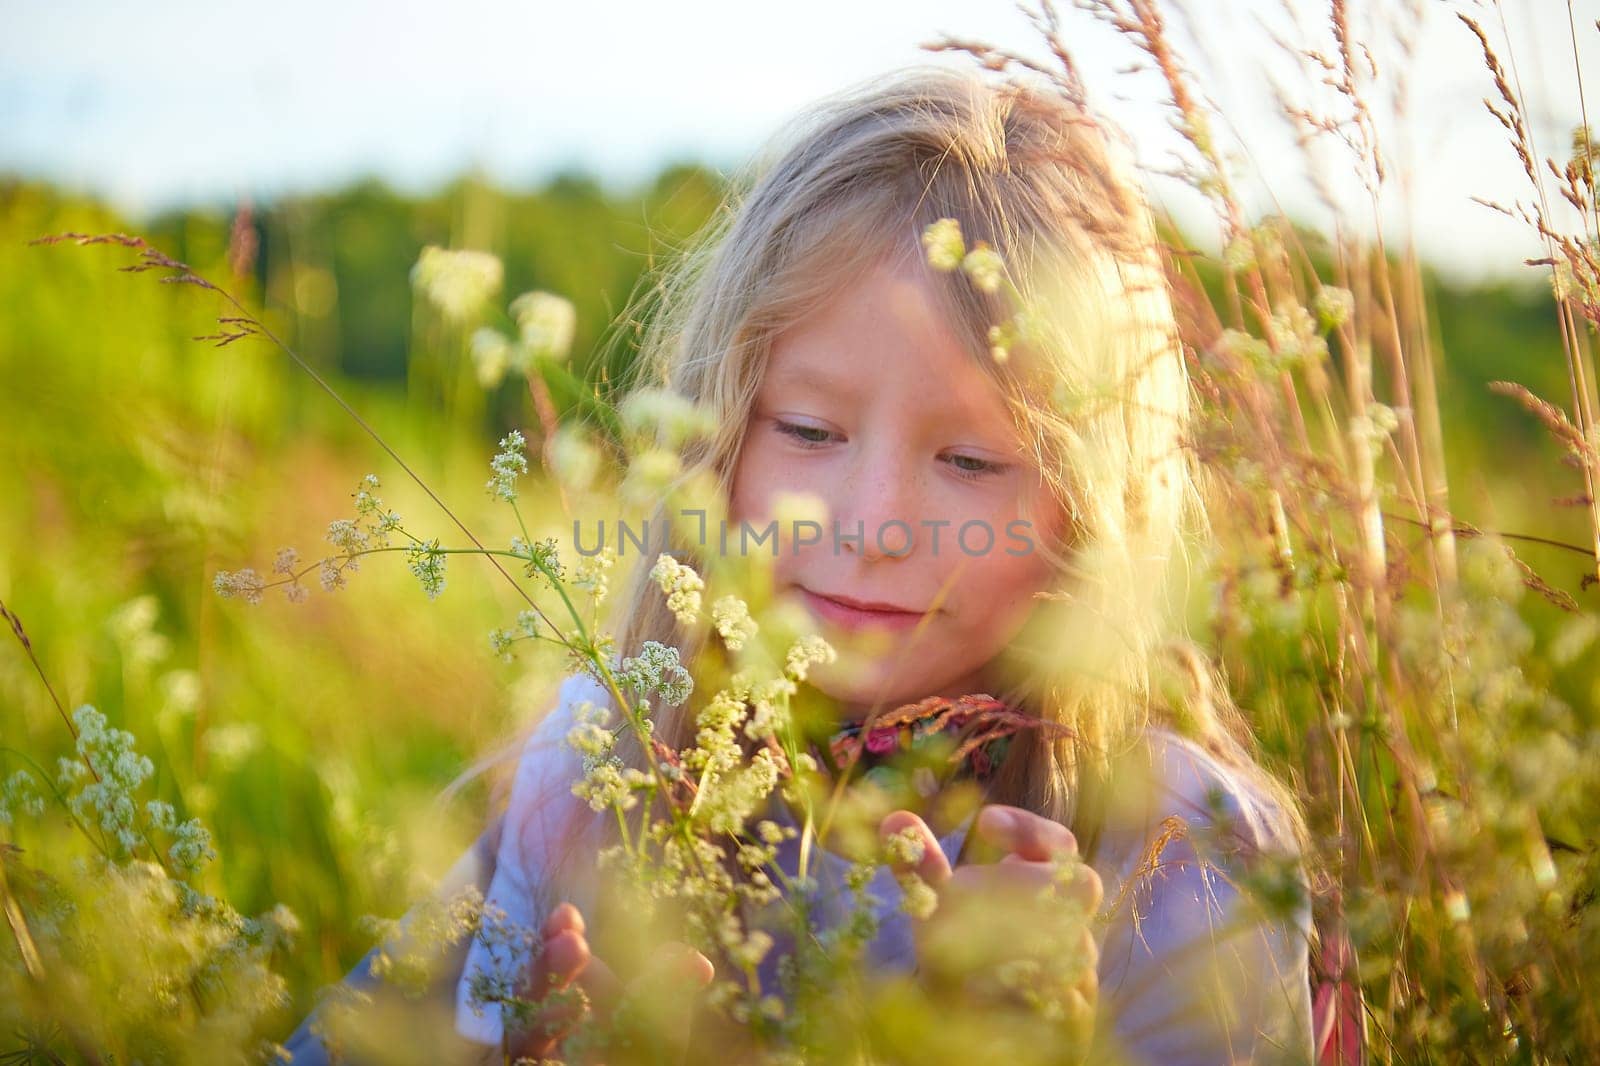 Portrait of pretty blonde girl having fun in a meadow on a natural landscape with grass and flowers on a sunny summer day. Portrait of a teenage child in summer or spring outdoors on field by keleny